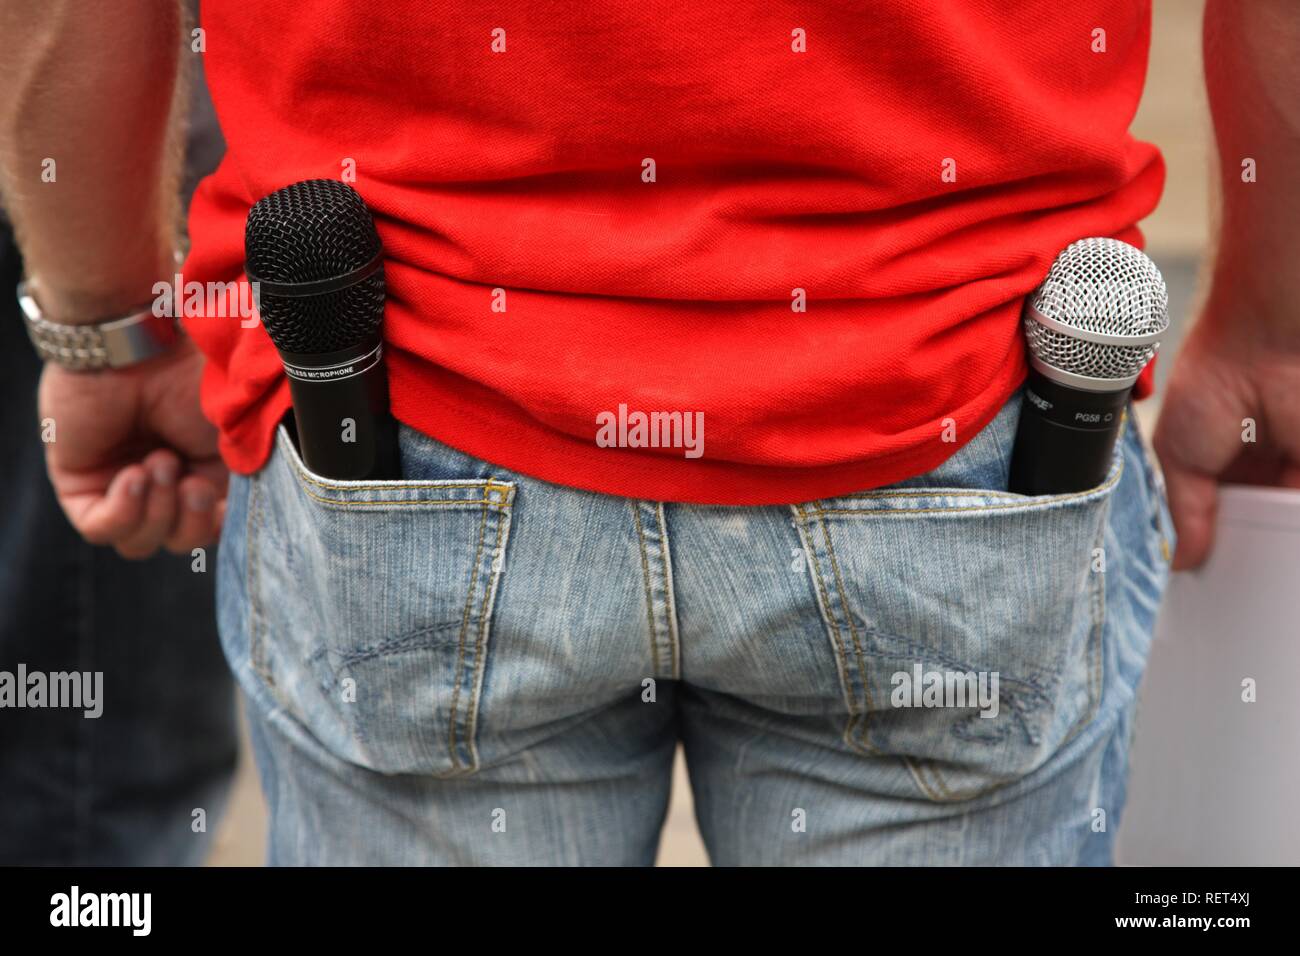 Man with 2 wireless microphones in the rear pockets of his jeans, moderator at an event, Germany Stock Photo